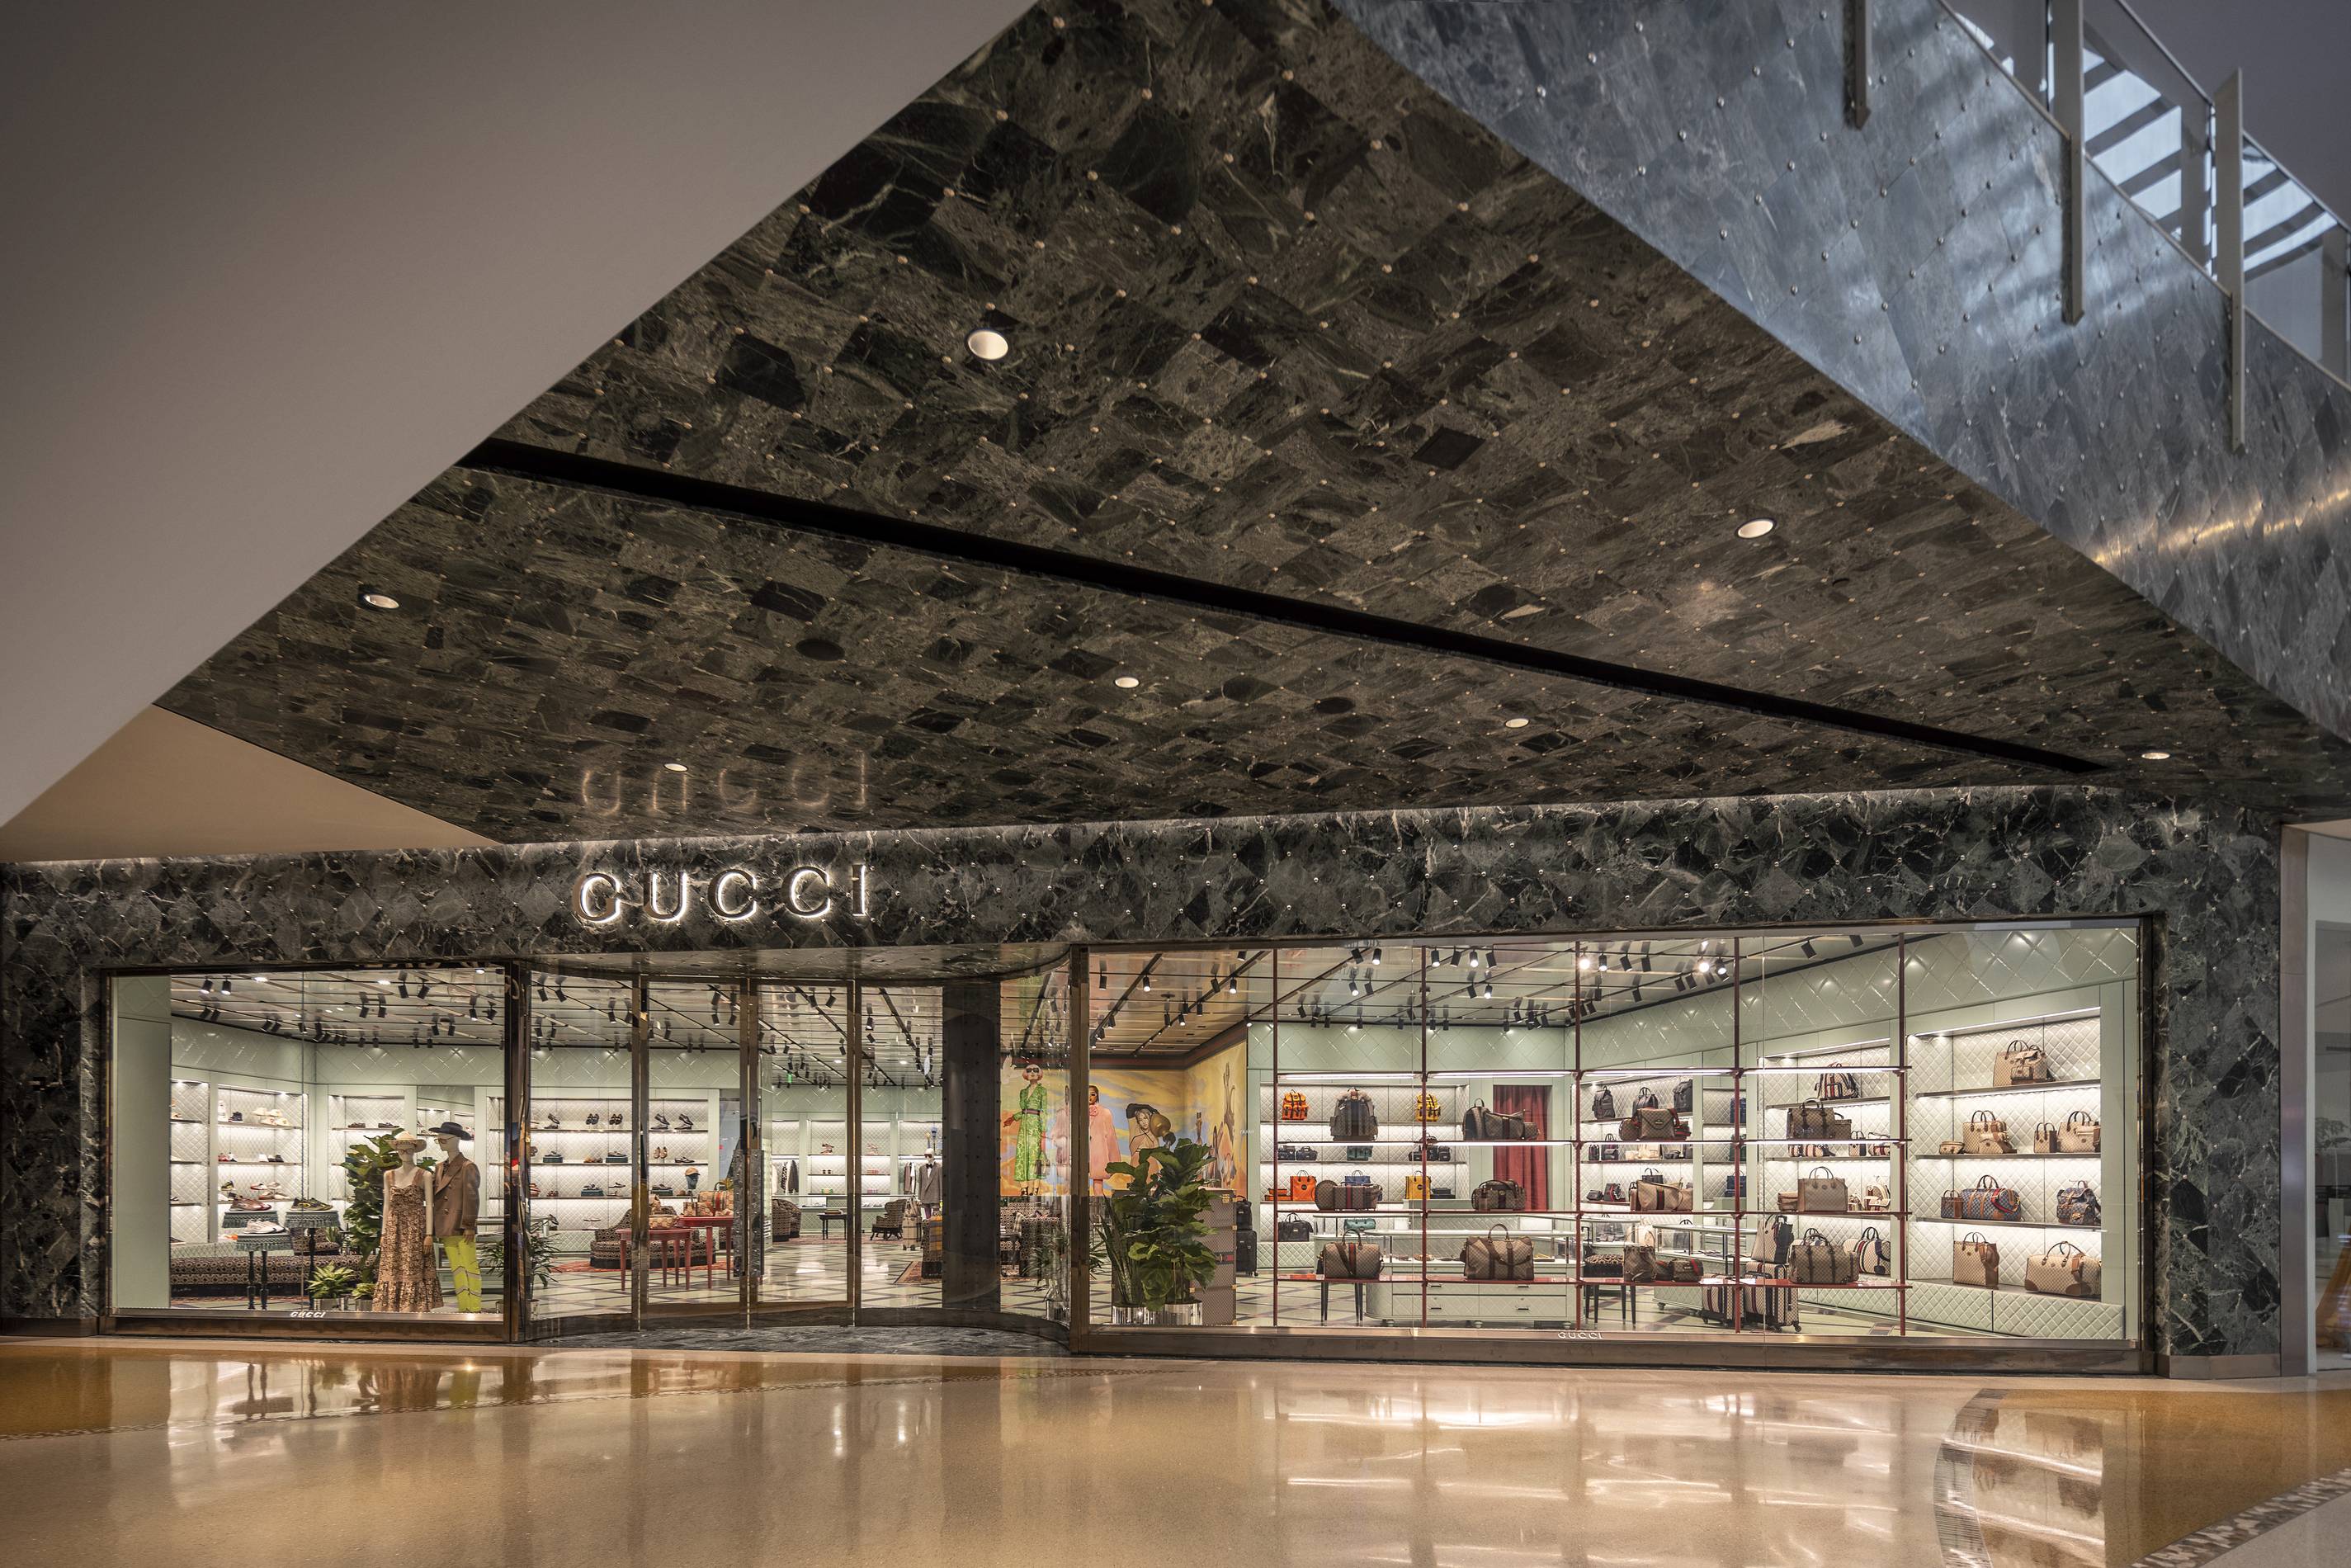 Step Inside The New Gucci Boutique At The Shops At Crystals